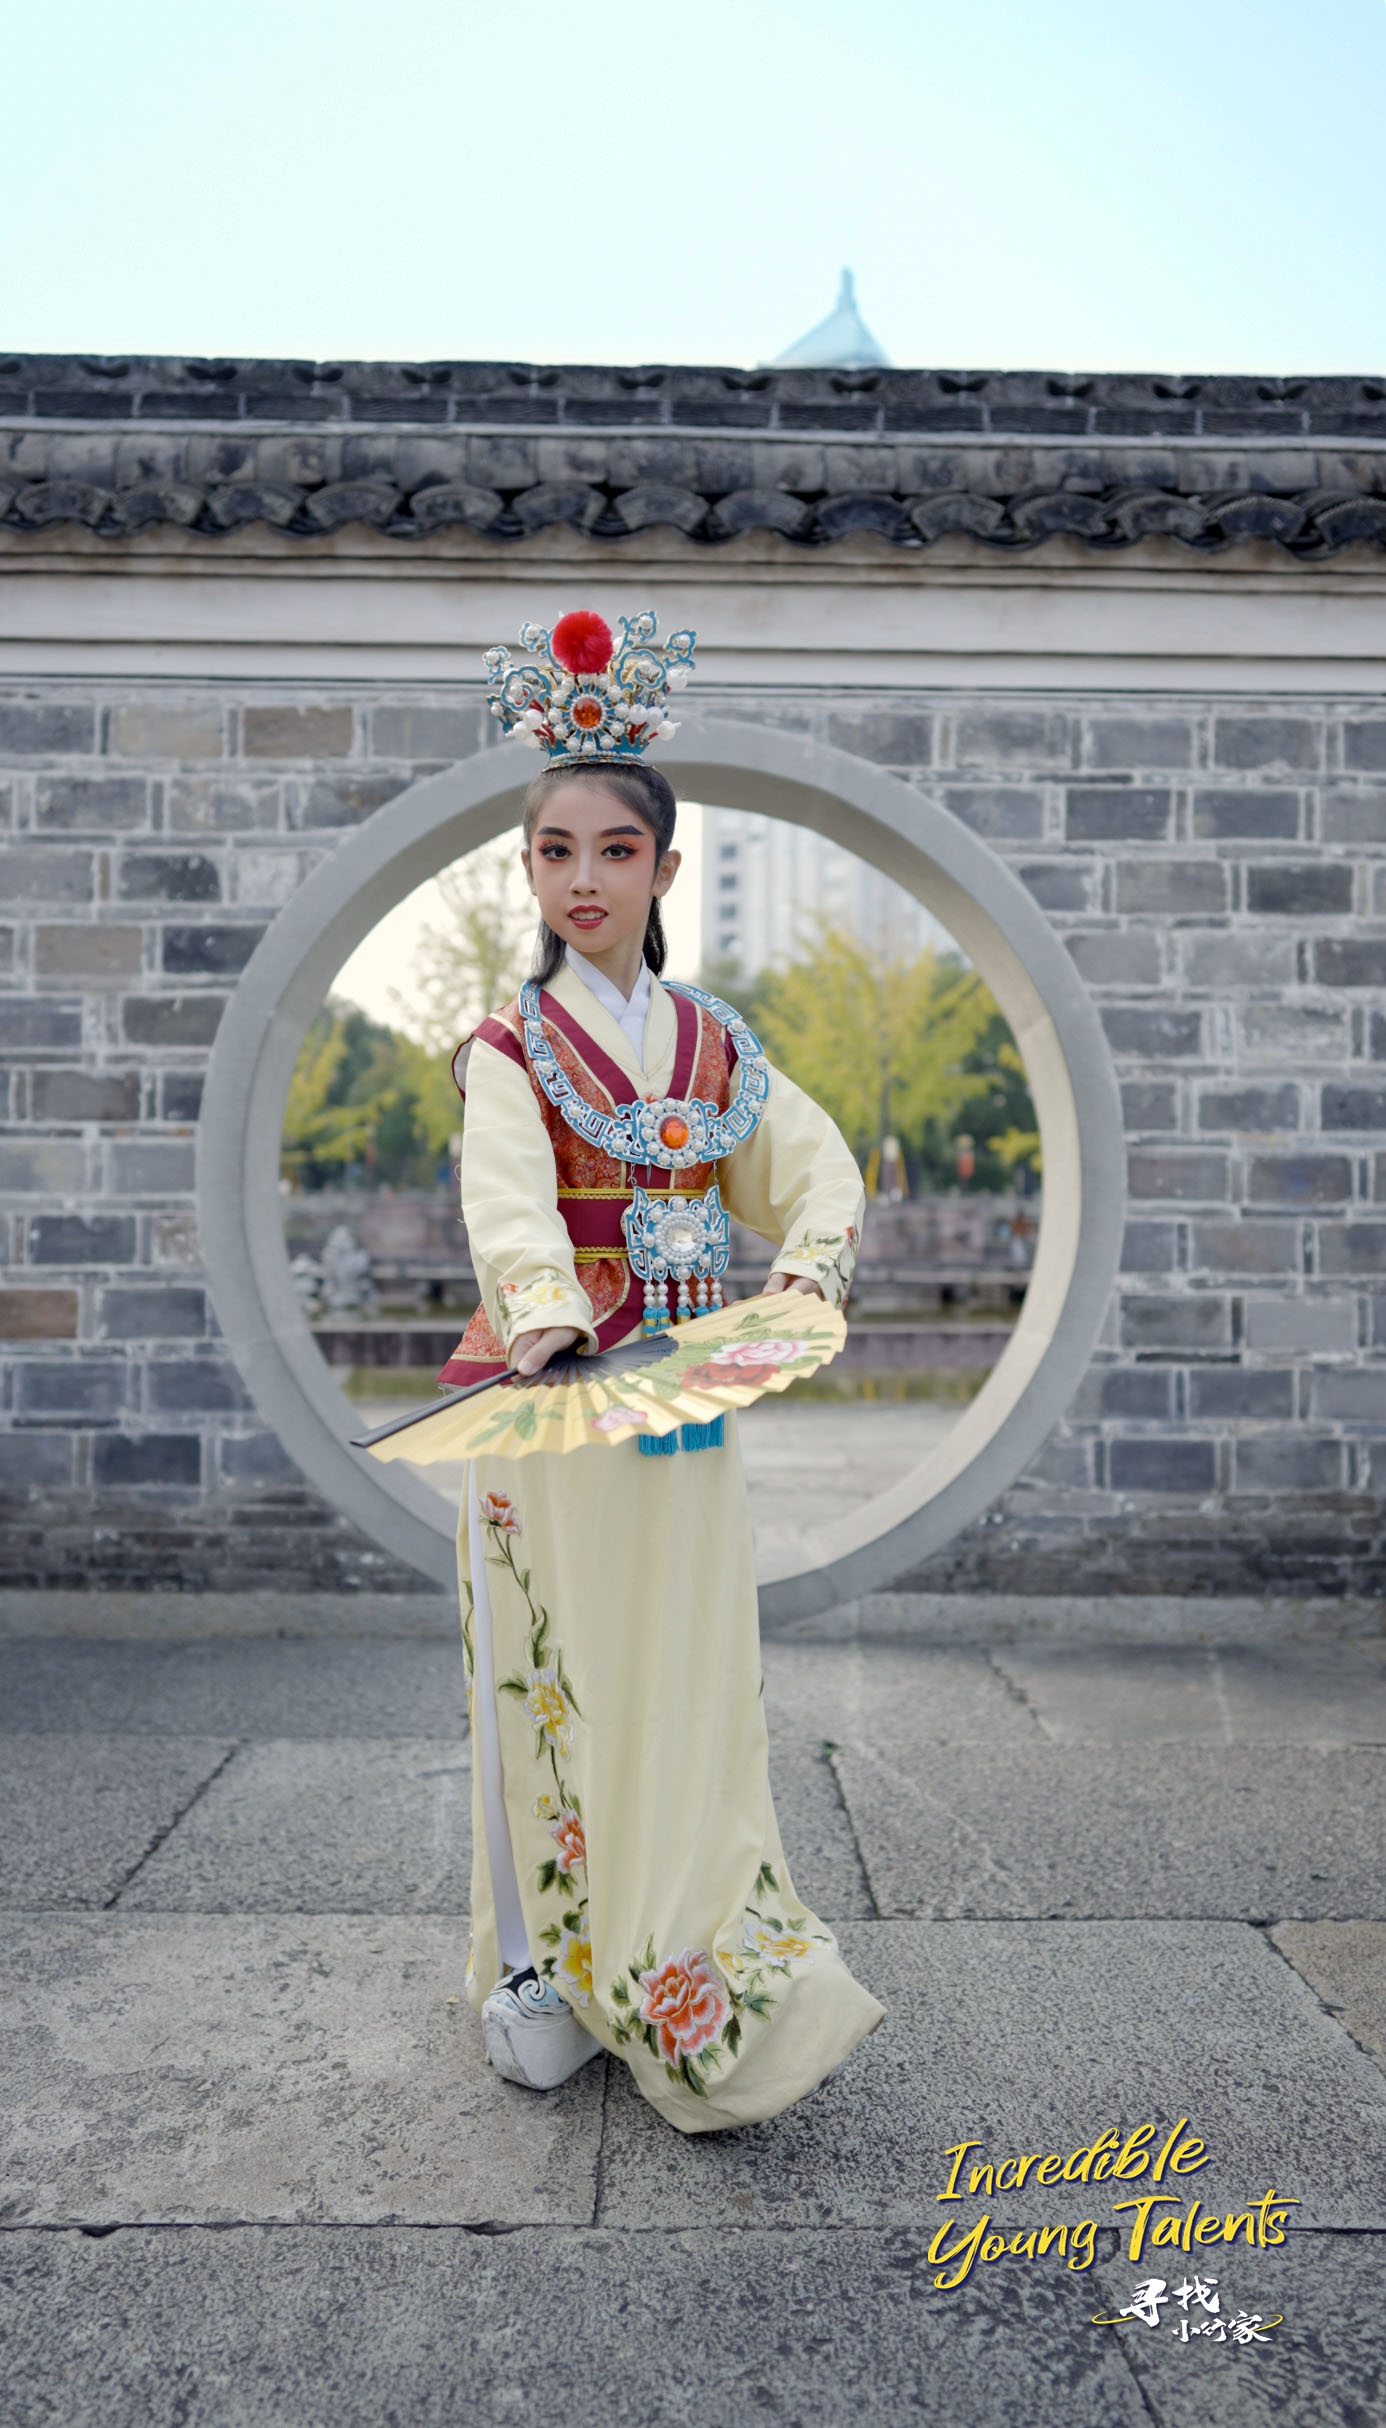 Wang Yuhan portrays a male role in the traditional Chinese Yueju Opera play 